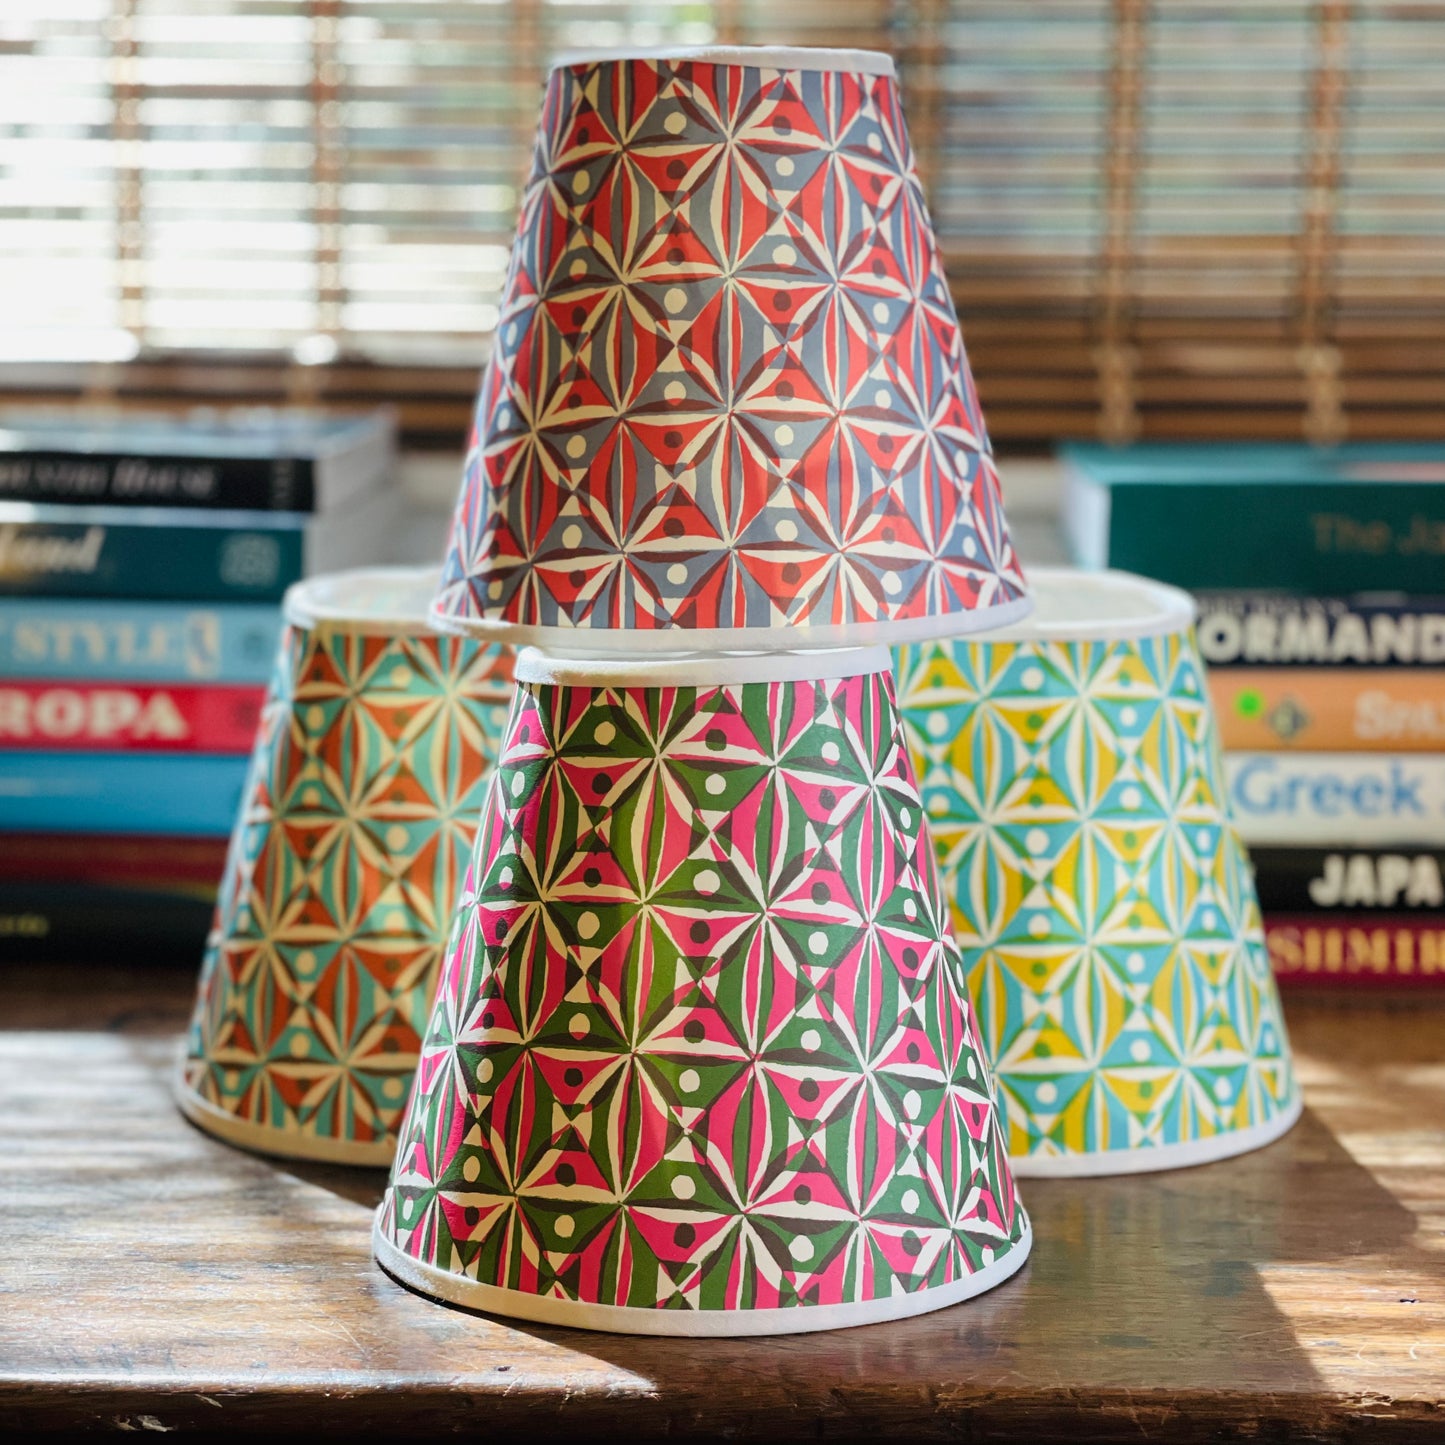 Small Clip-On Lampshade. Patterned Paper from England. "Kaleidoscope" Yellow and Turquoise. White Trim.